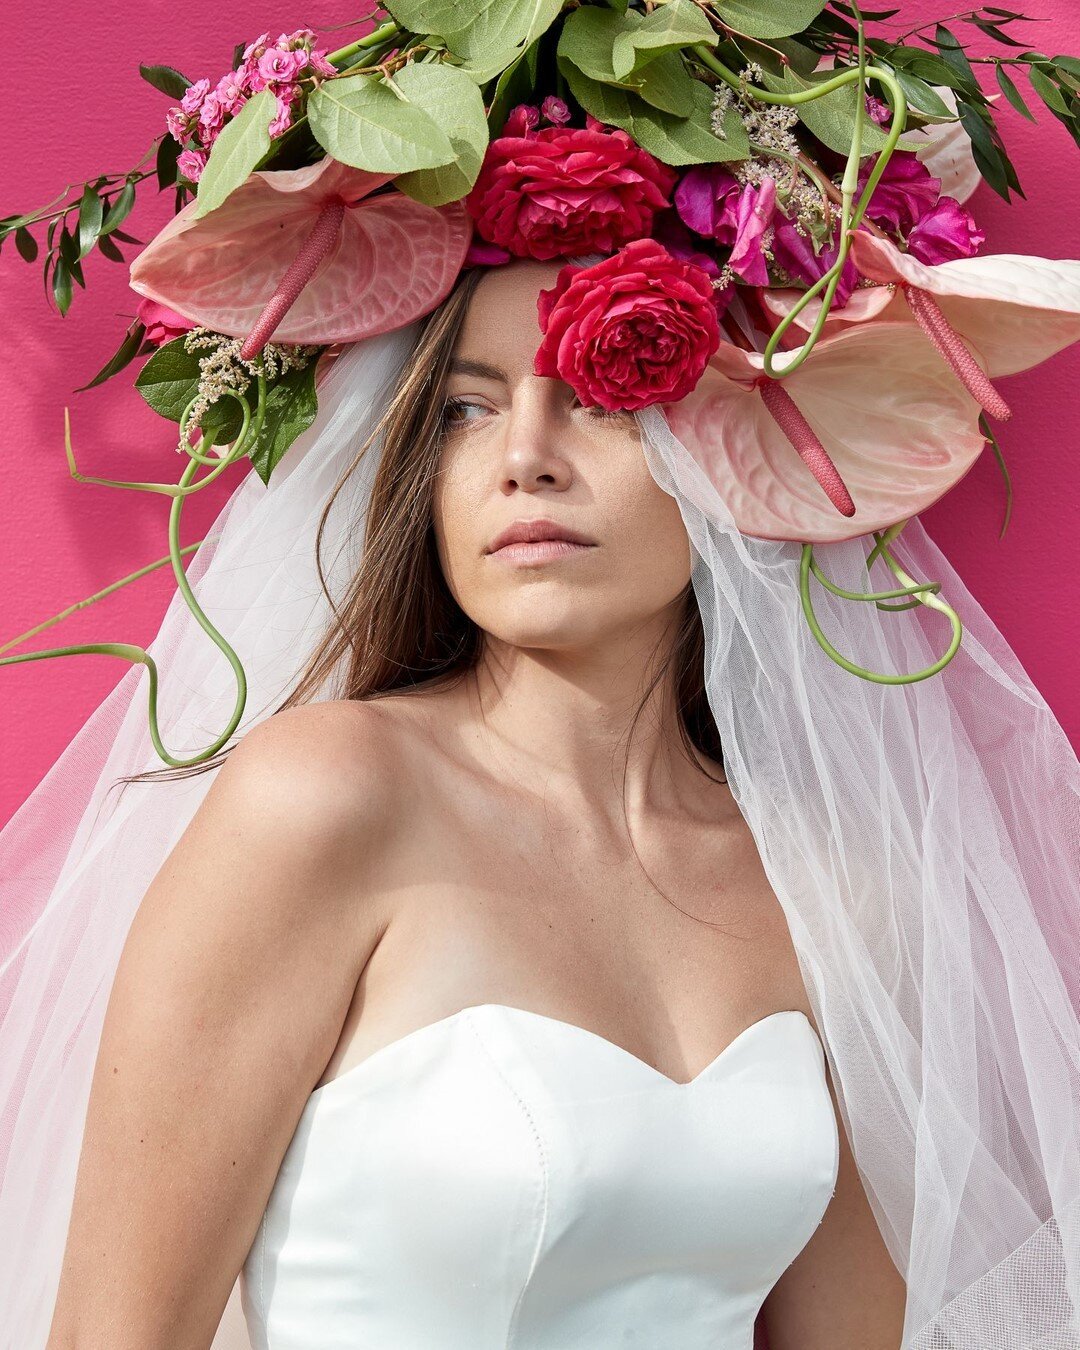 It&rsquo;s called fashion darling! ✨We are so in love with this absolutely stunning shoot. From the floral headpiece to the pink backdrop, this styled shoot is bringing the bridal fashion runway to life. Even if this isn&rsquo;t quite your bridal sty